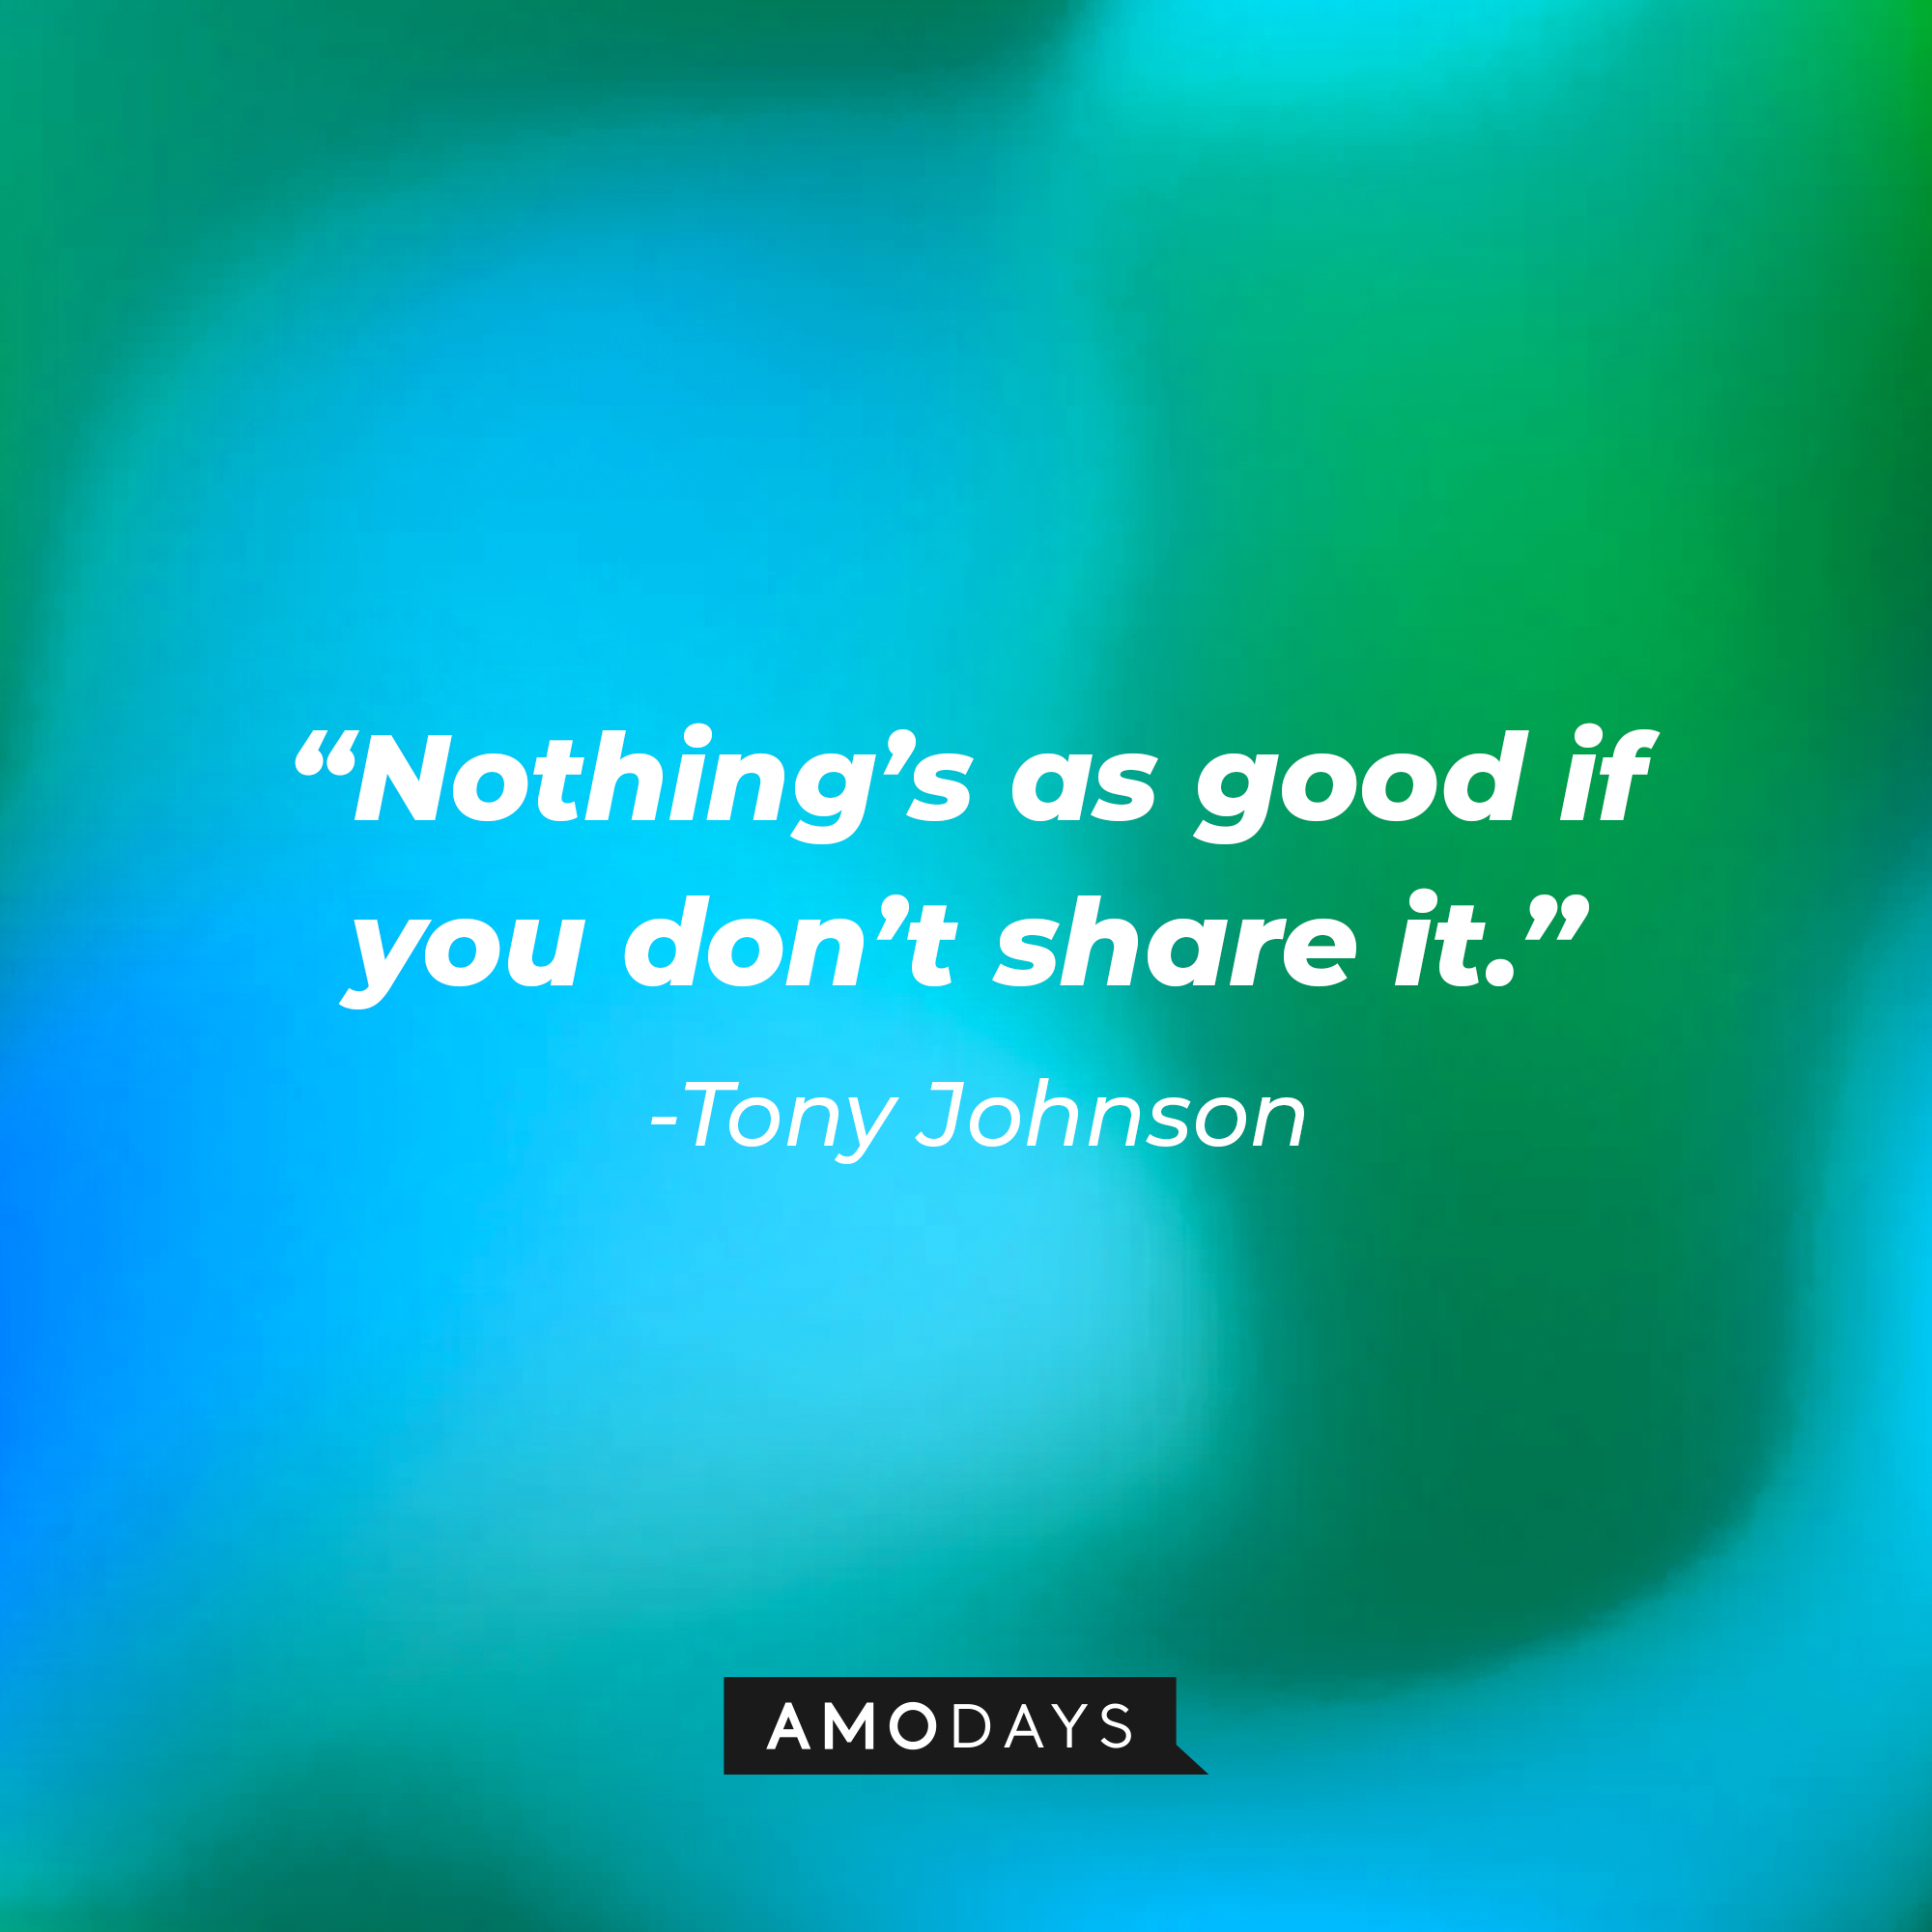 Tony Johnson’s quote:  “Nothing’s as good if you don’t share it.” |  Source: AmoDays